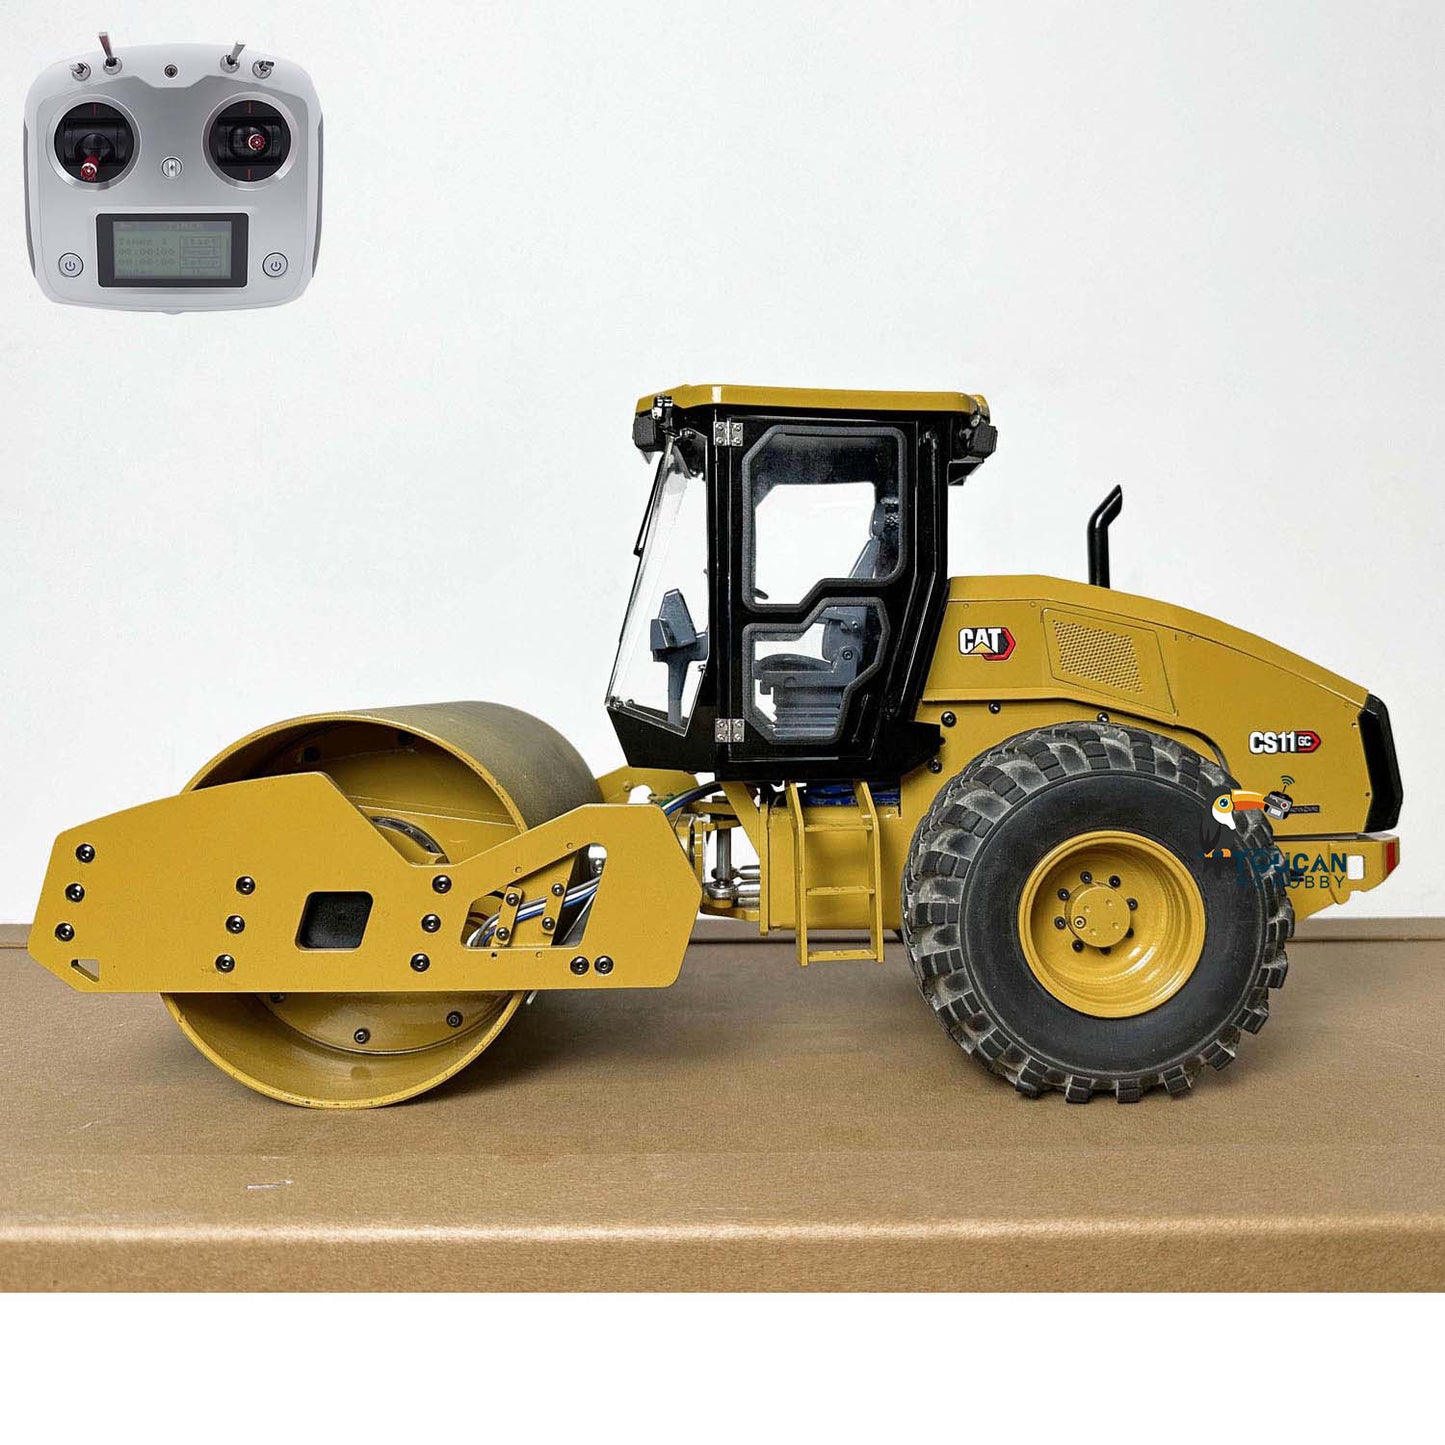 JZM Metal 1/12 CS11 Assembled Painted RC Road Roller Remote Control Engineering Vehicles Car Models FlySky I6S Radio System